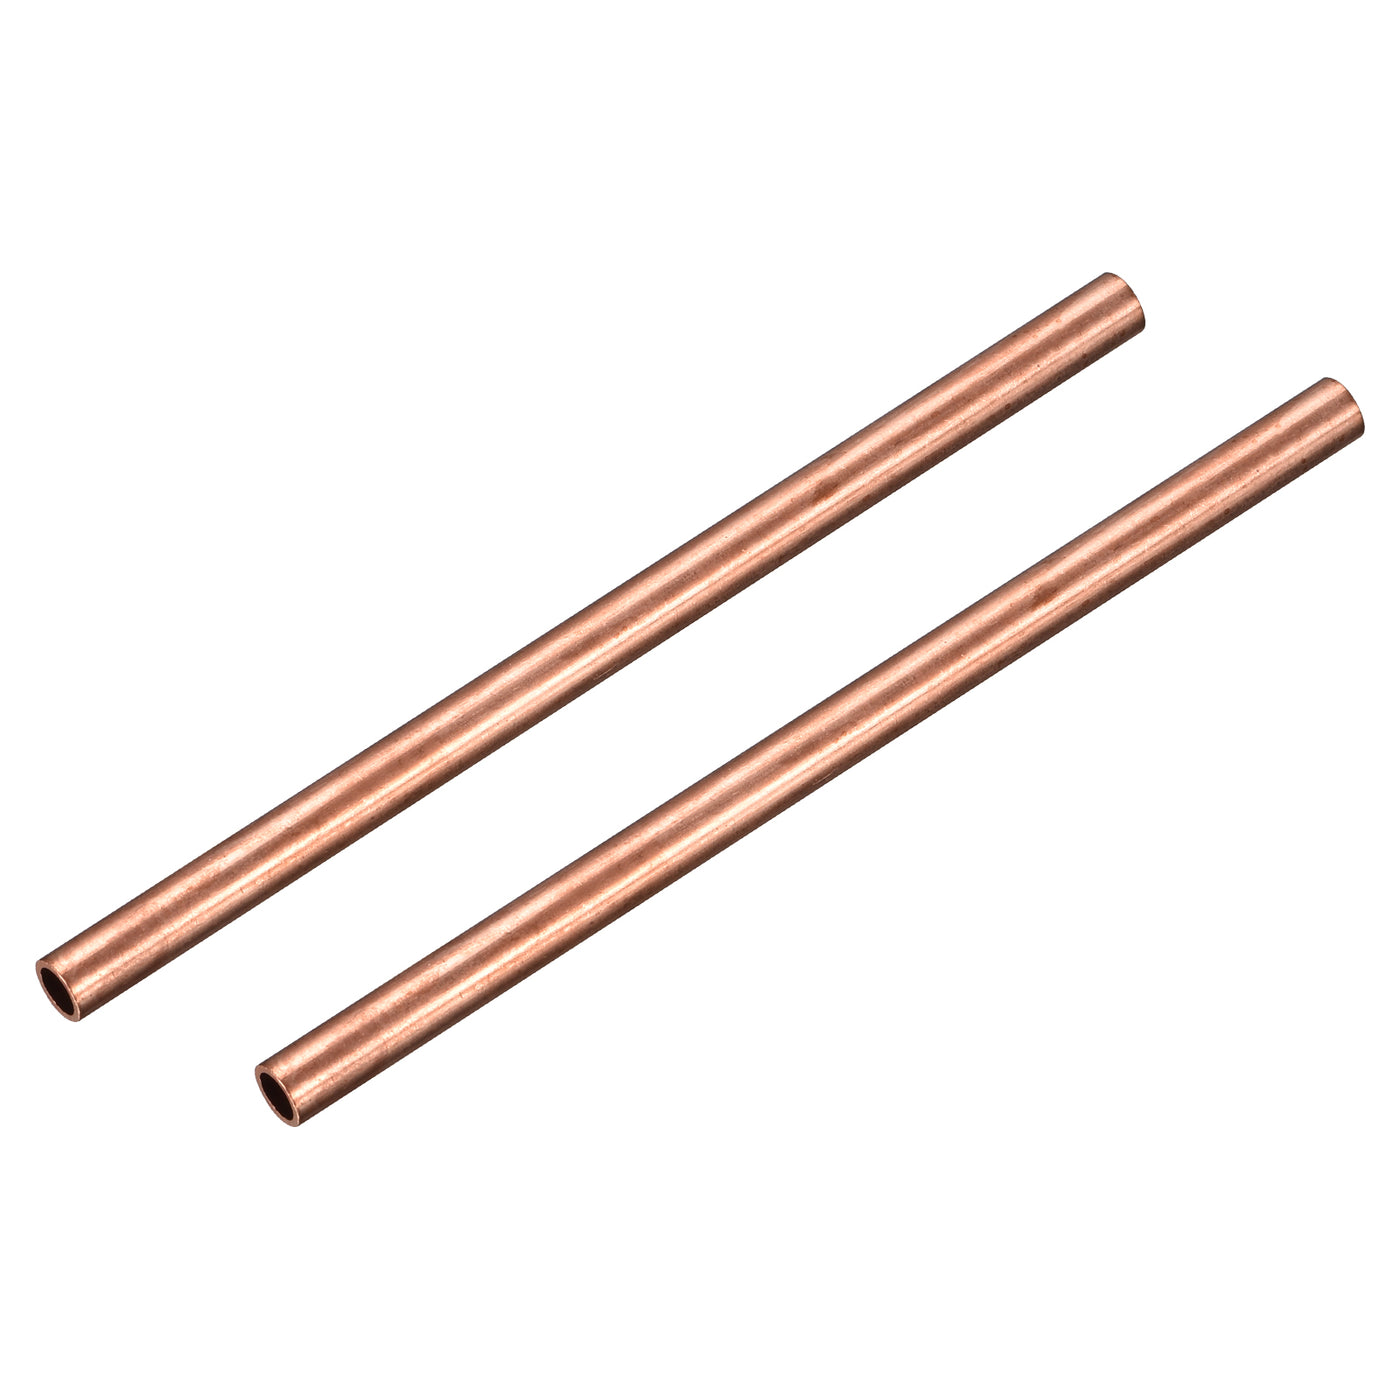 uxcell Uxcell Copper Round Tube 8mm OD 1mm Wall Thickness 150mm Length Pipe Tubing 2 Pcs